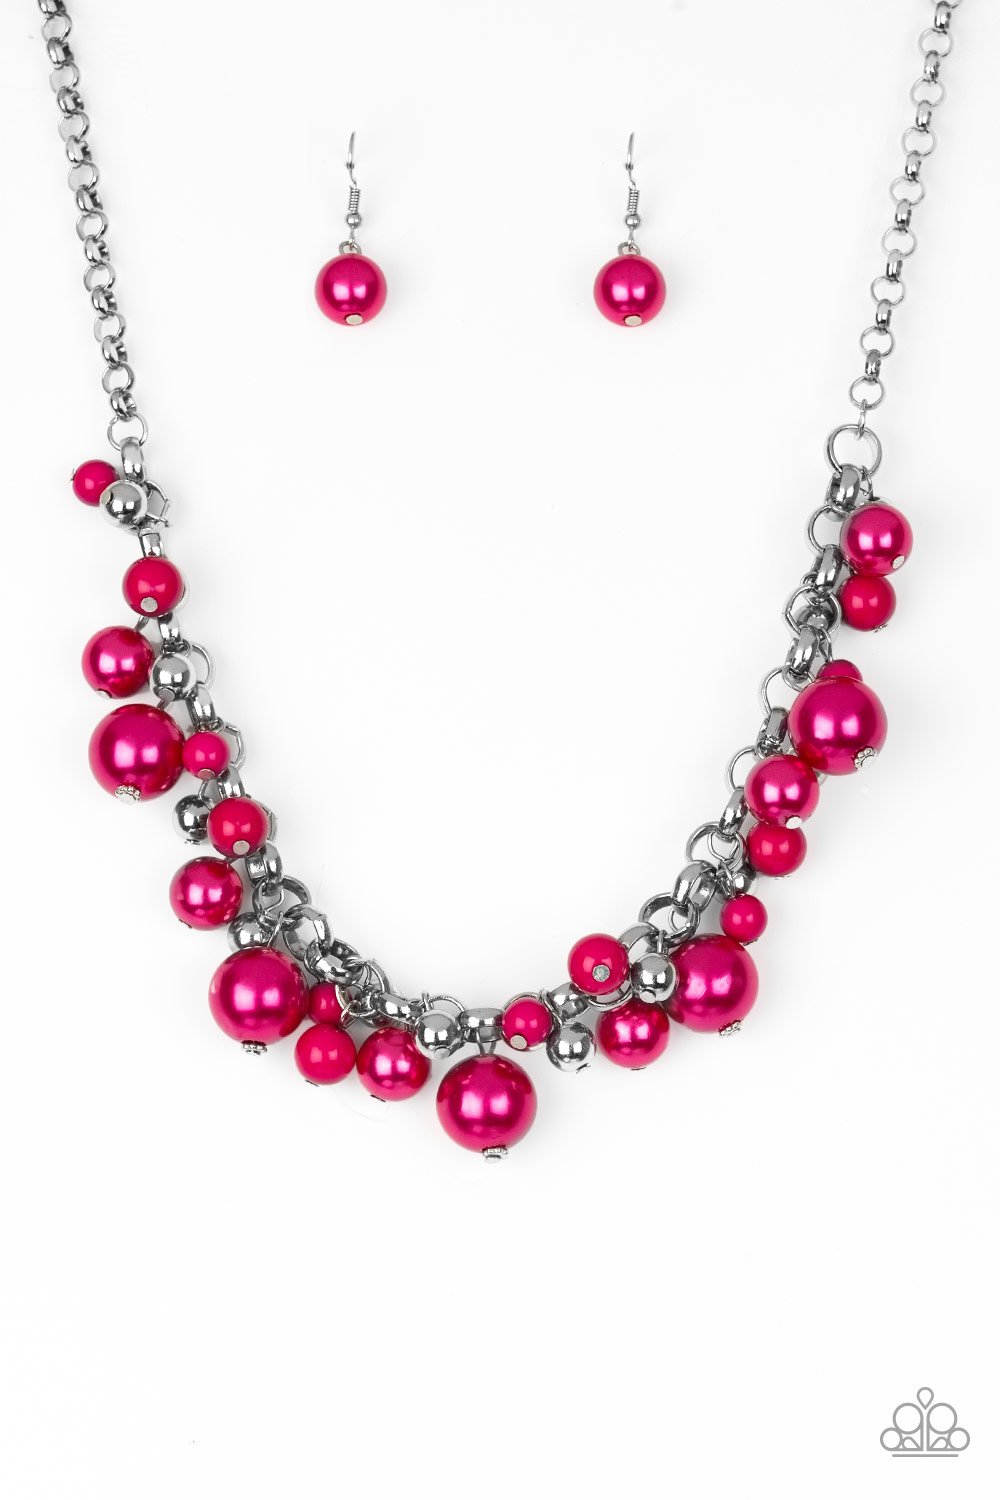 Paparazzi Necklace ~ The Upstater - Pink